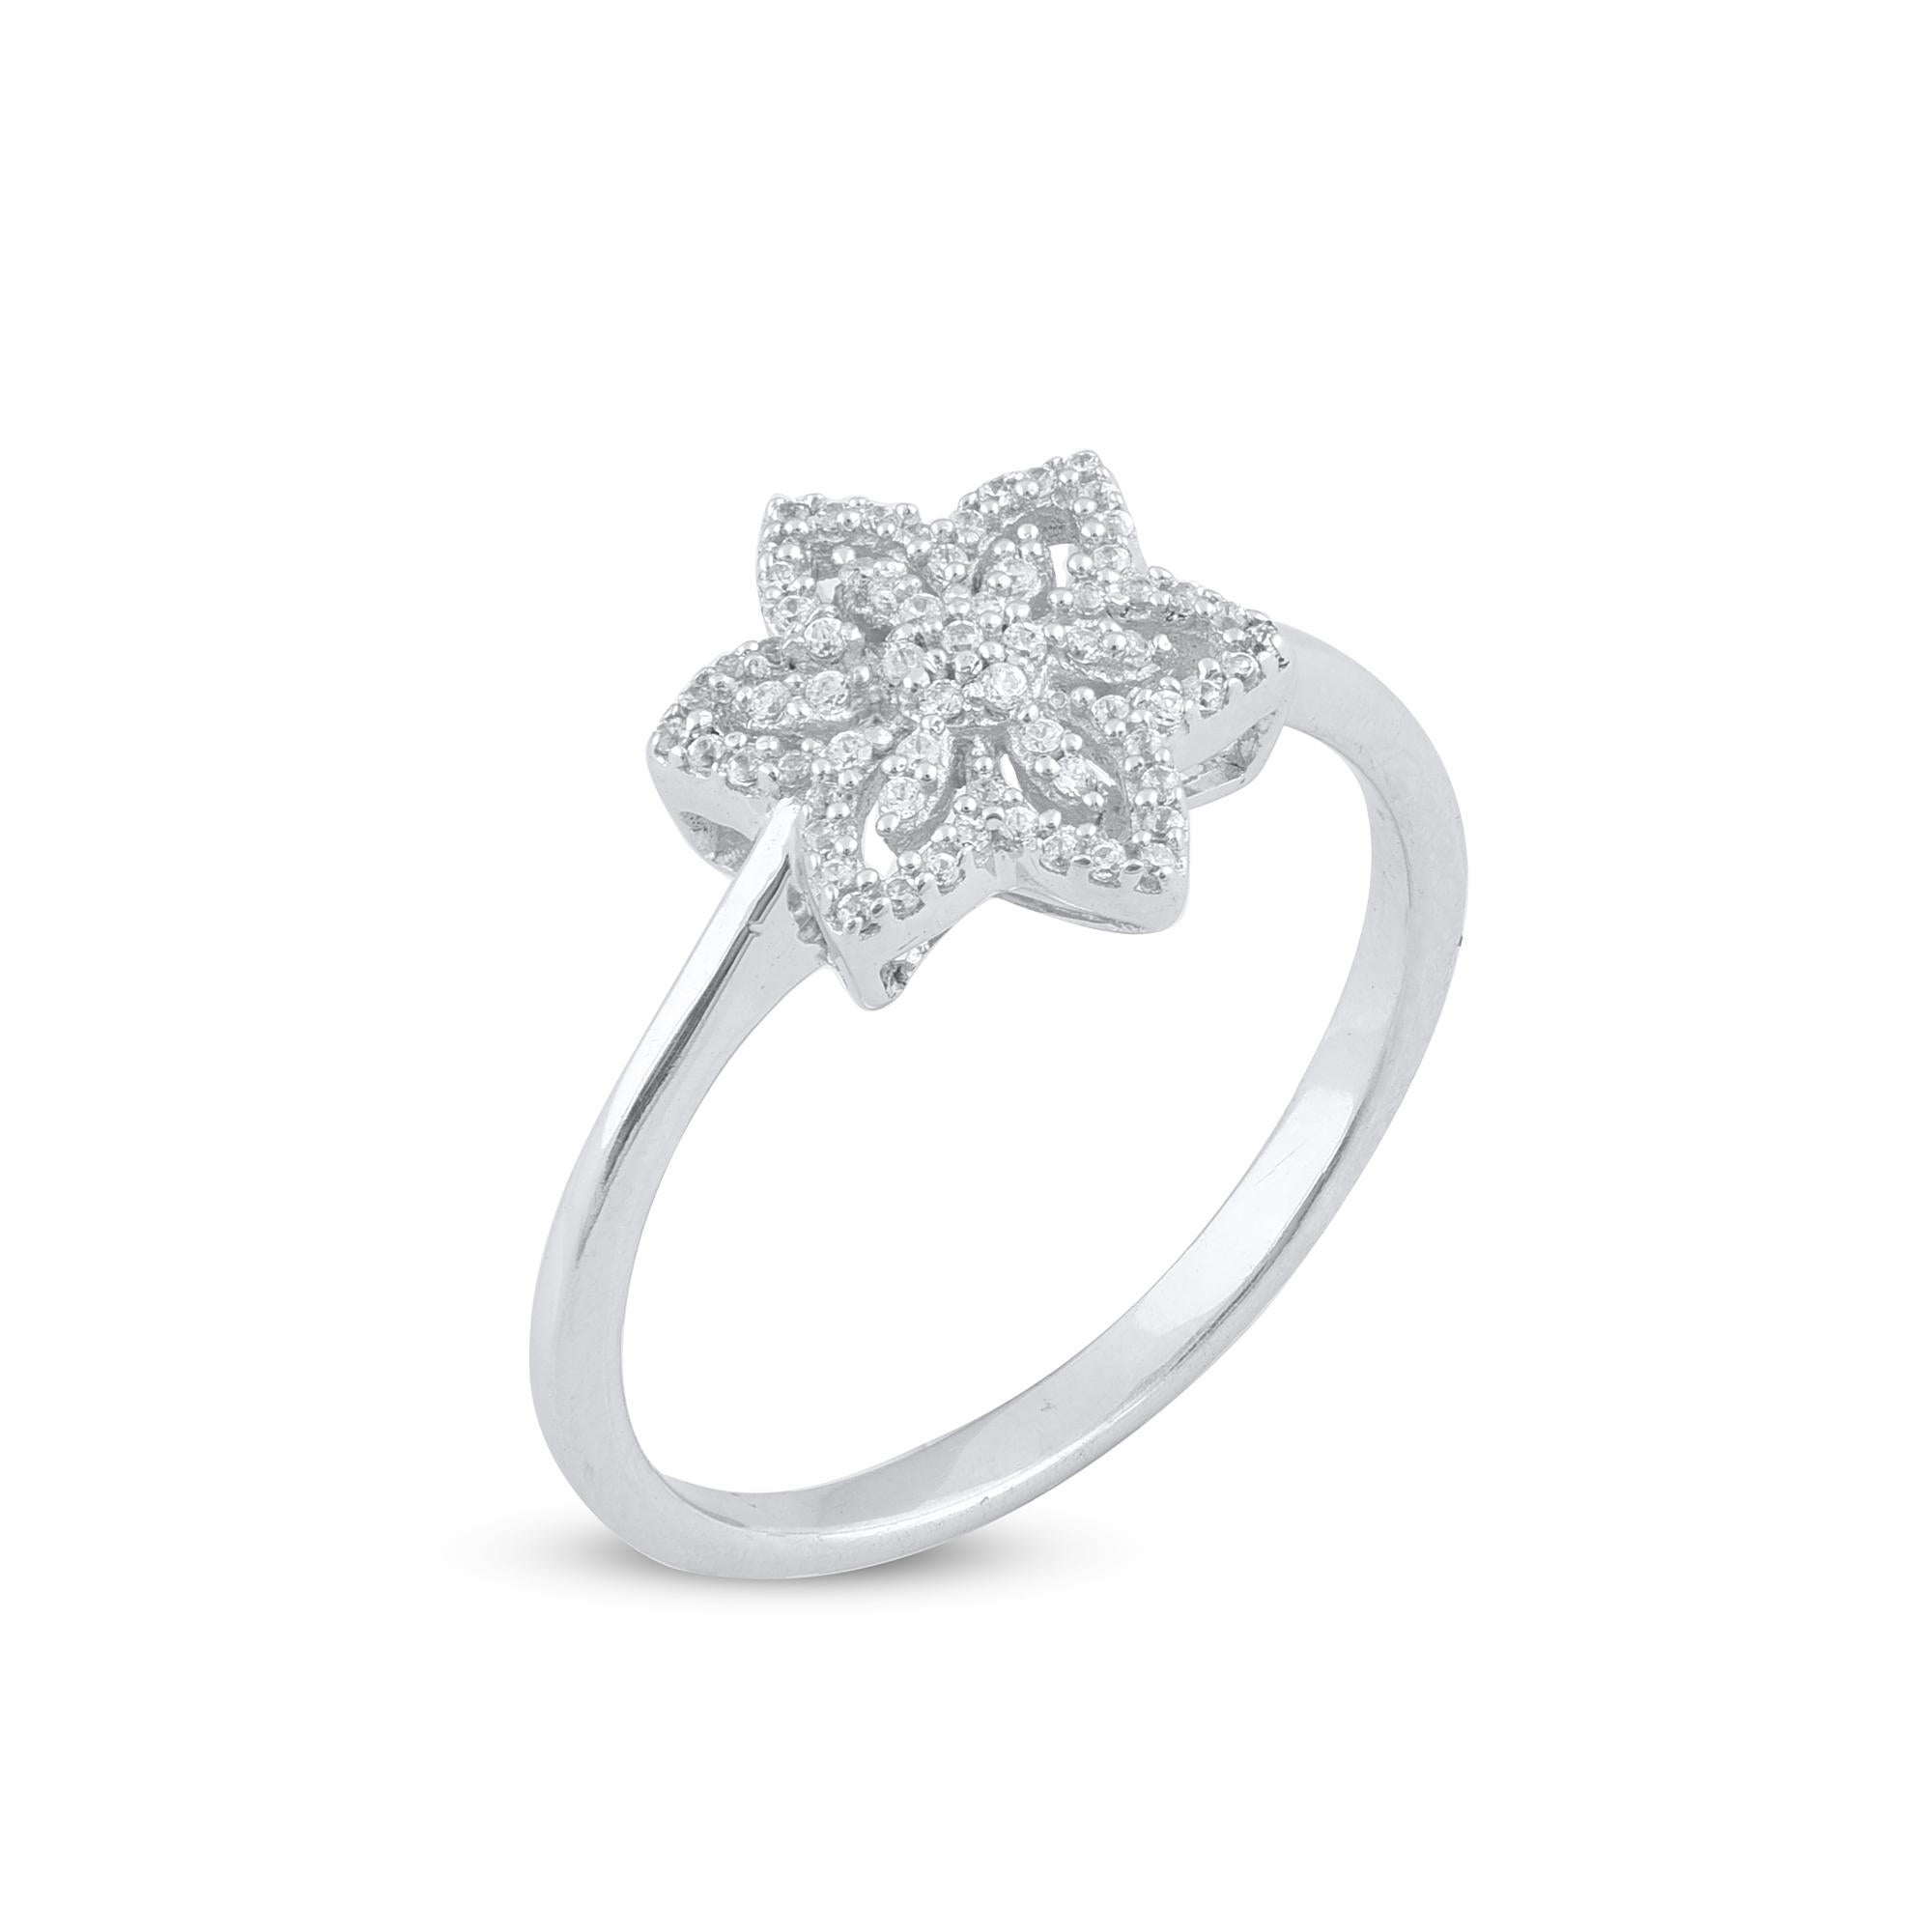 This Floral shaped Wide Band Ring is expertly crafted in 14 Karat White Gold and features 67  Round Brilliant-cut White diamonds set in prong setting. We only use 100% natural and conflict free diamonds which sparkles in H-I color I1 clarity. A